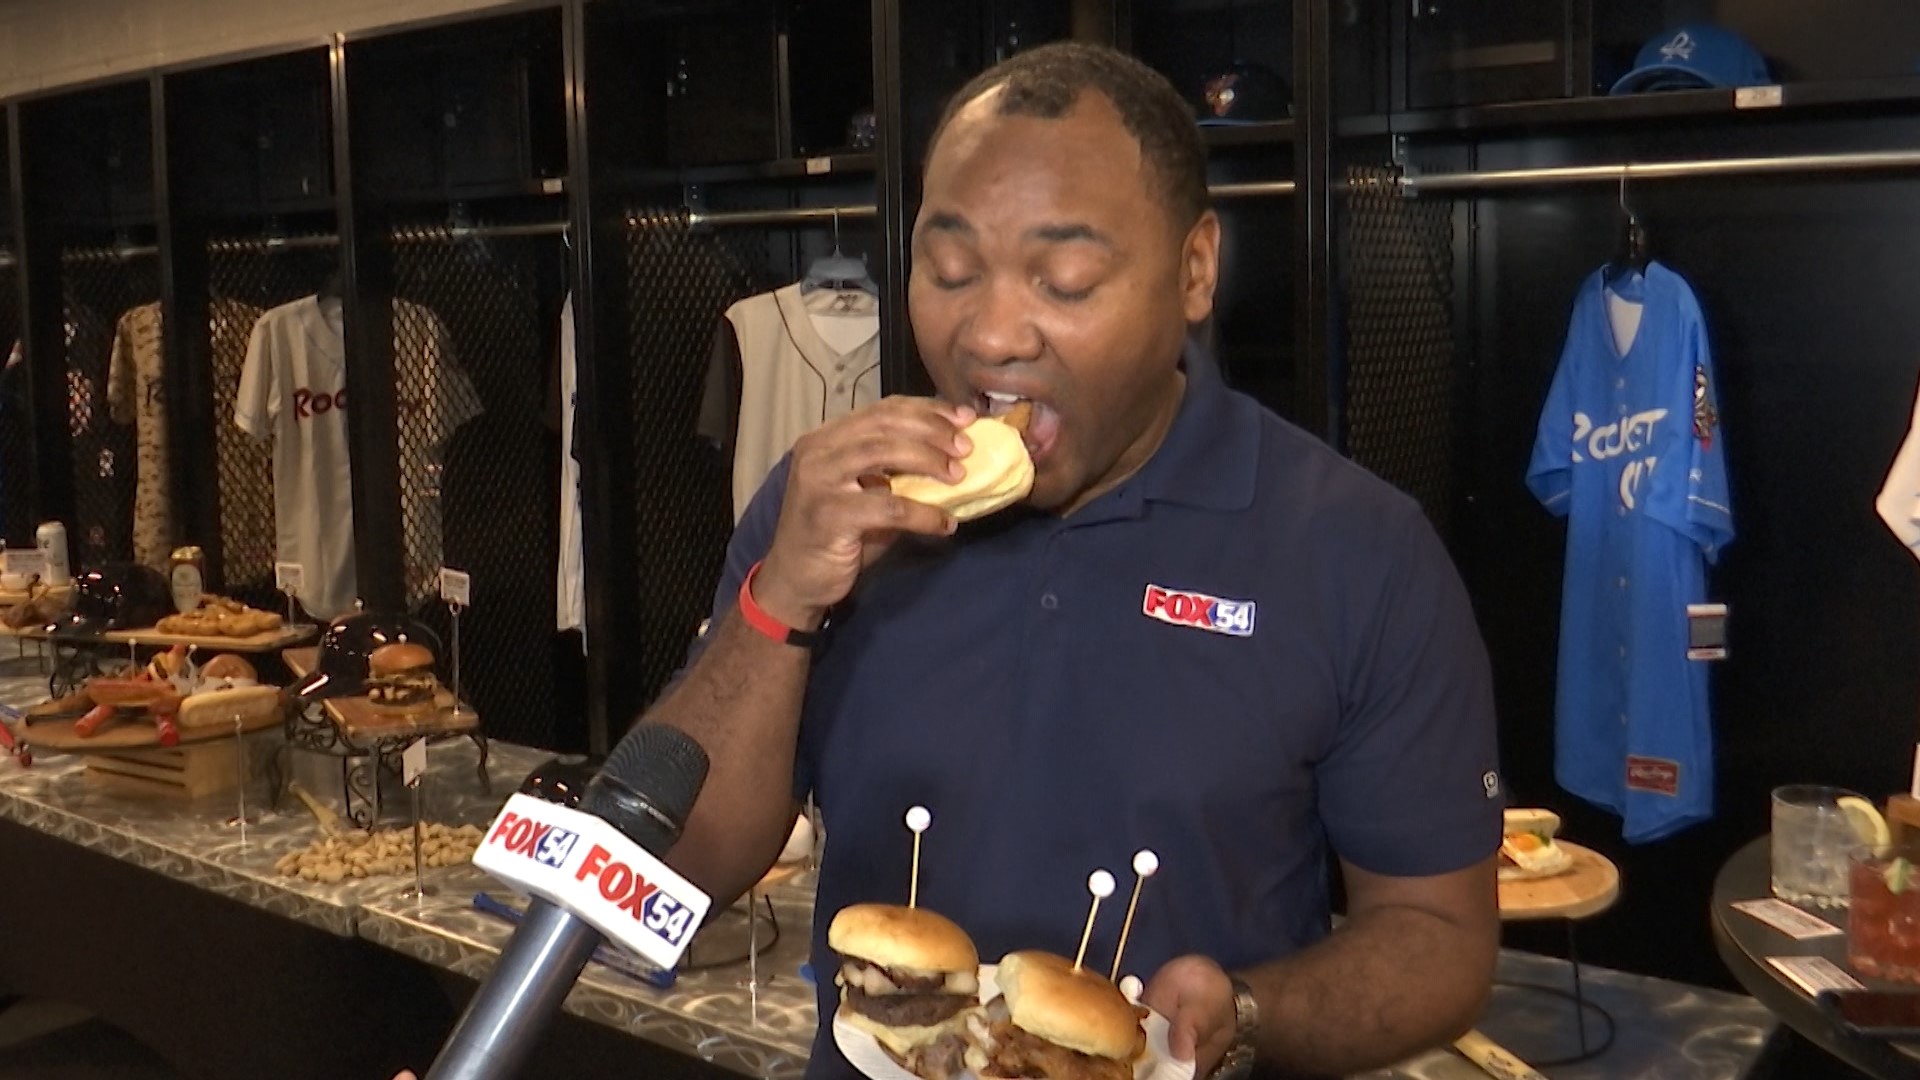 There are new items on the menu at Toyota Field, and Mo Carter gives a first-hand review of the finger-lickin' options!